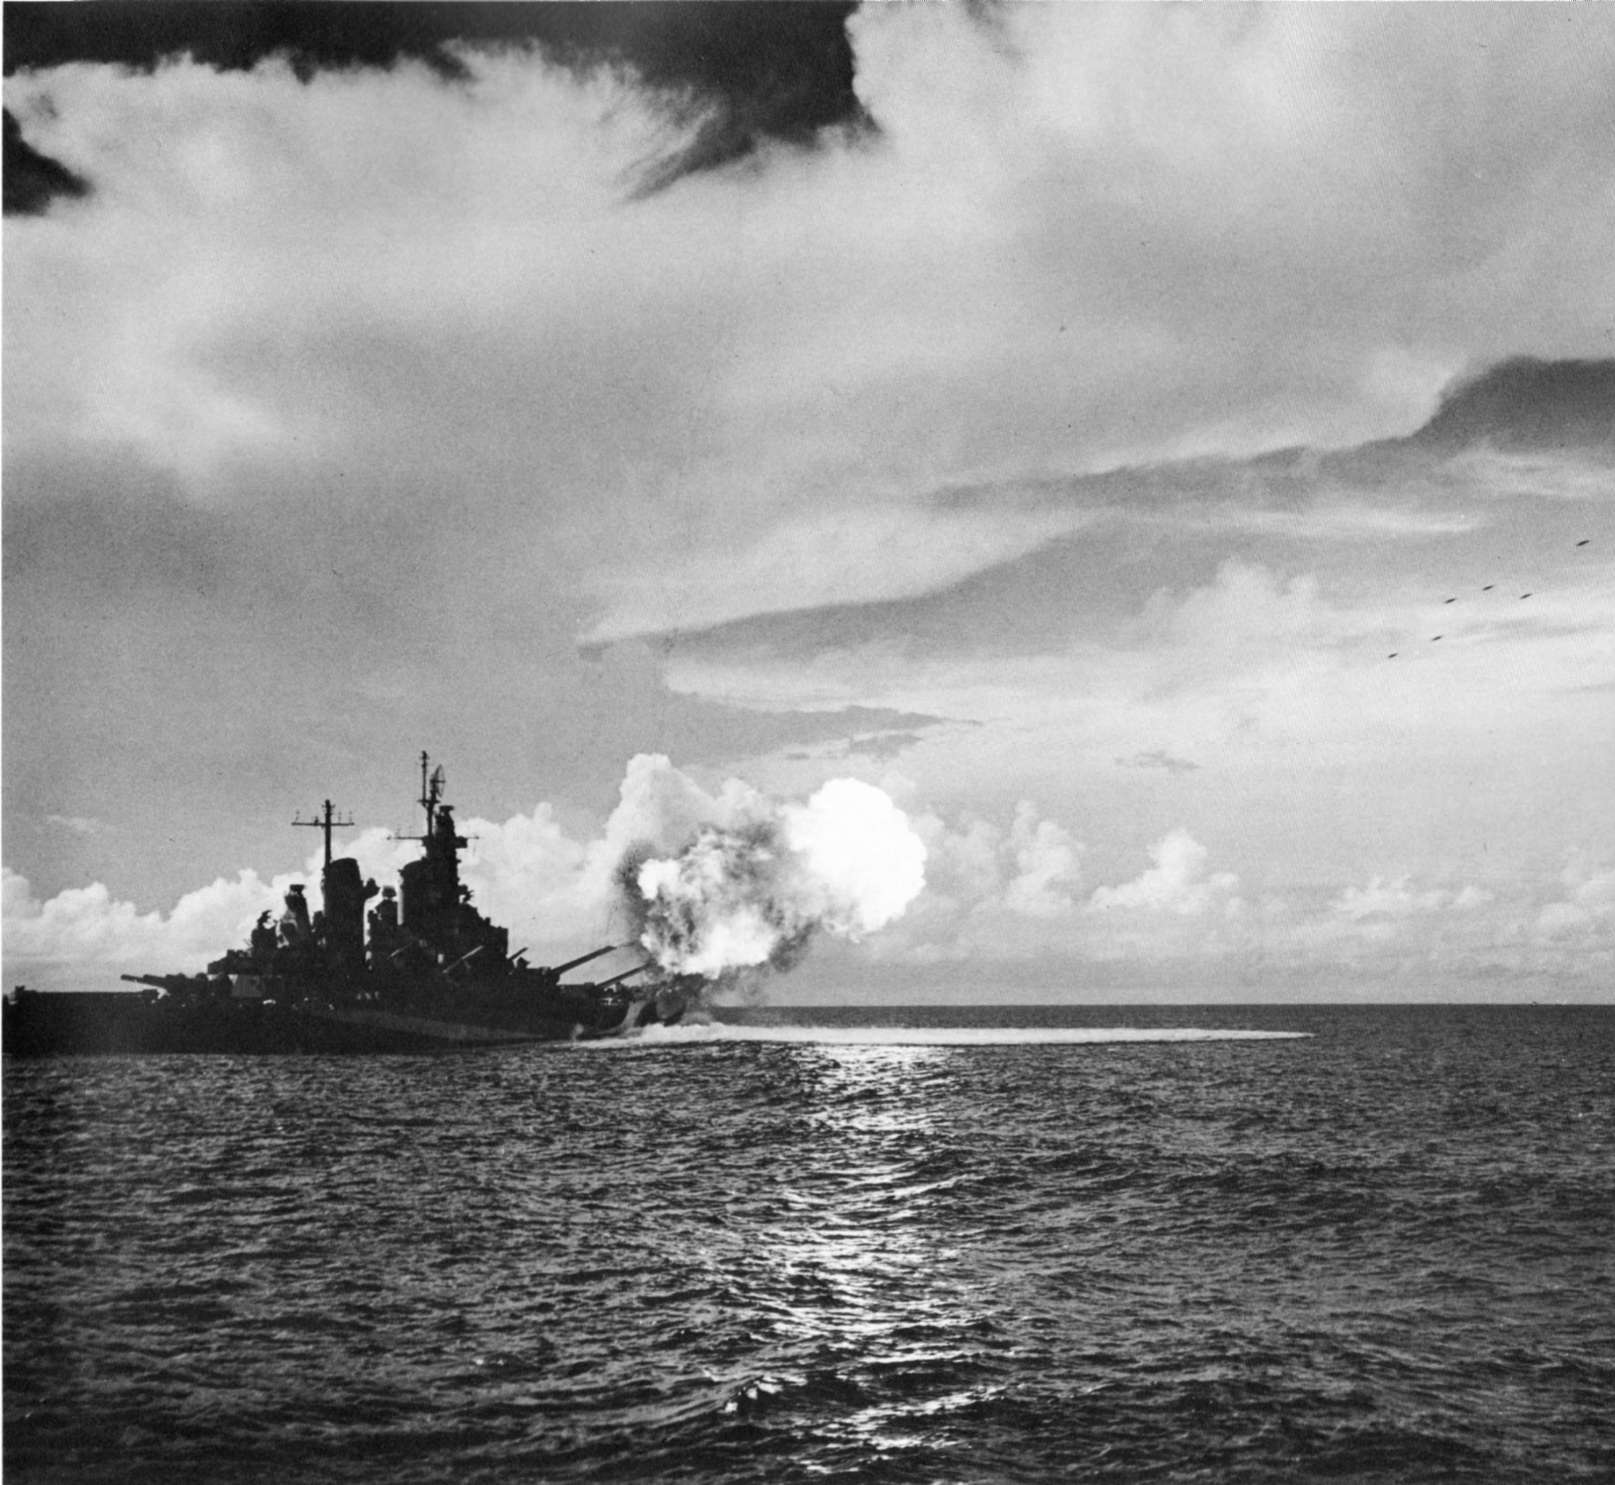 Missouri firing full salvo from both forward 16-inch gun turrets during shakedown exercise, Aug 1944; note six super-sonic projectiles at upper right; as seen on page 23 of US Navy War Photographs